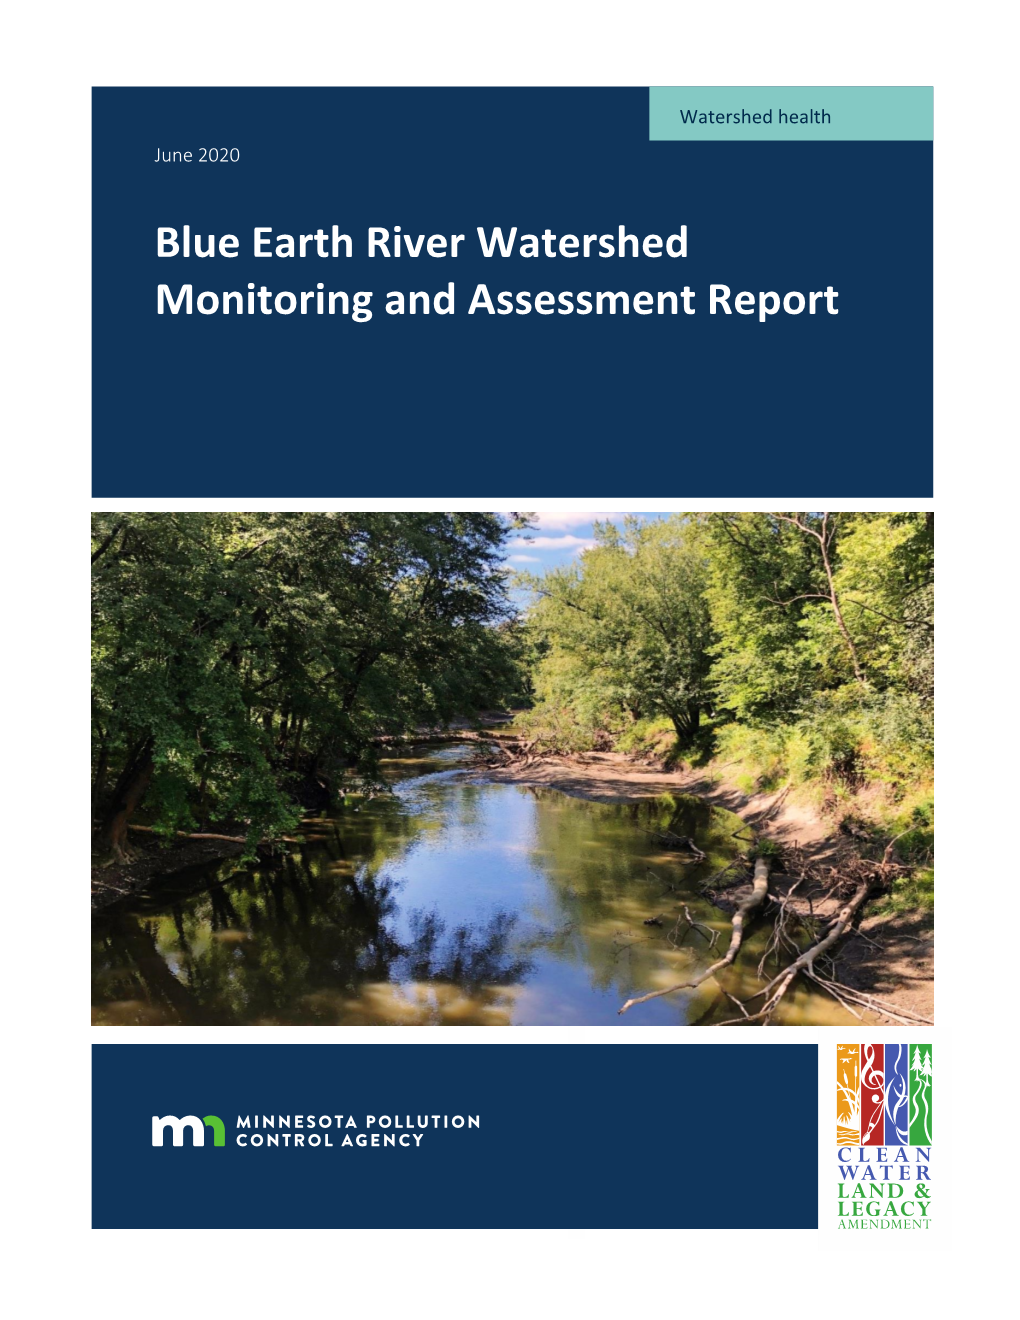 Blue Earth River Watershed Monitoring and Assessment Report